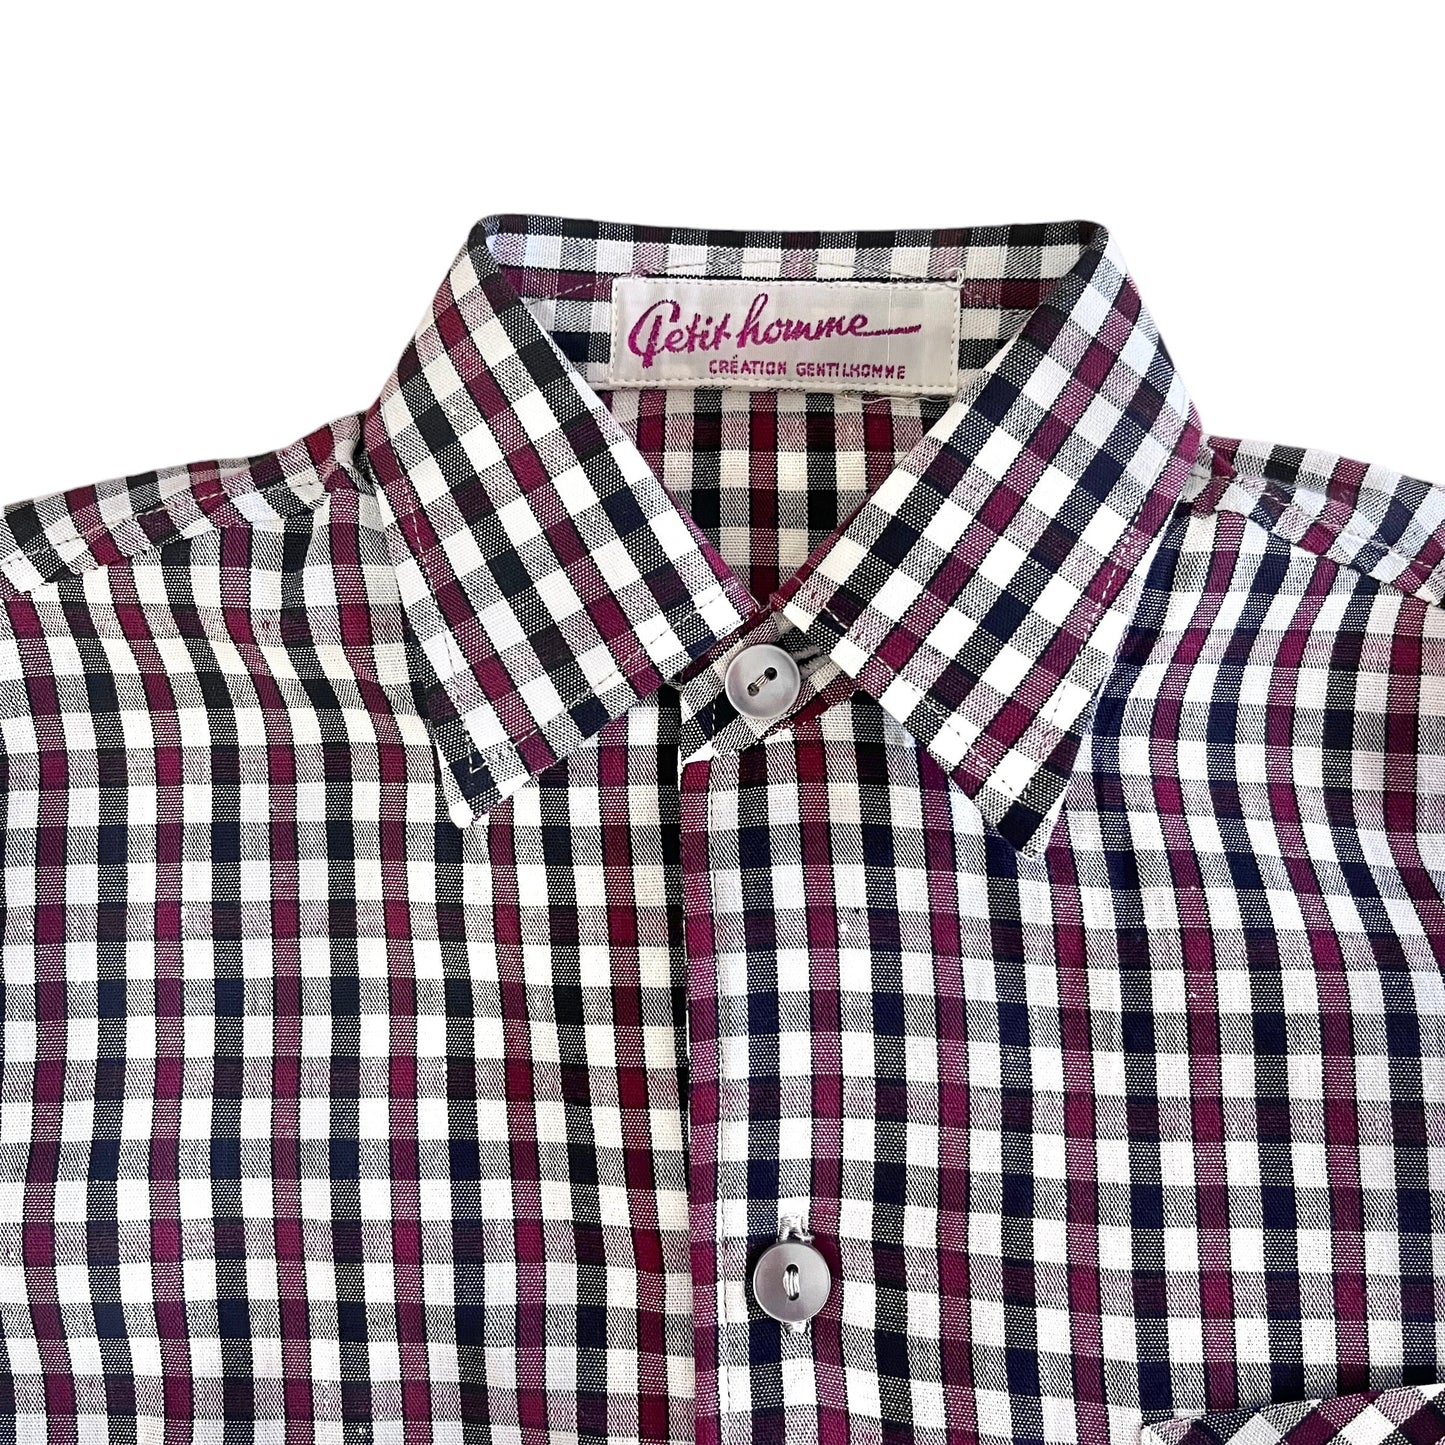 1960's Brown Gingham Mod Shirt 3-4Y